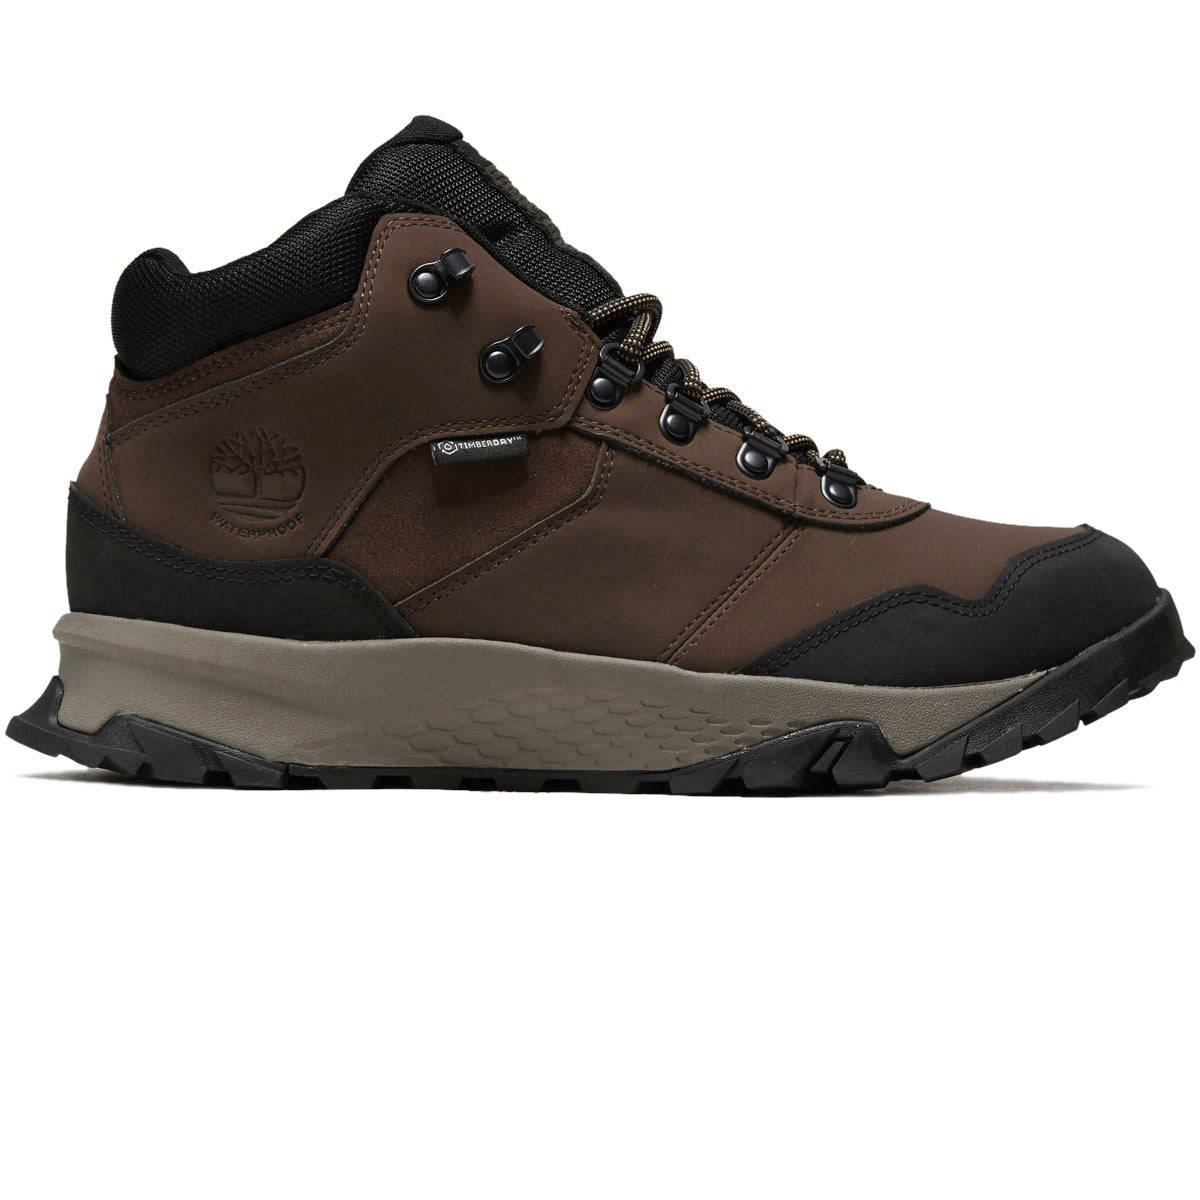 Timberland Lincoln Peak Mid Wp Boots - Dark Brown Leather image 1